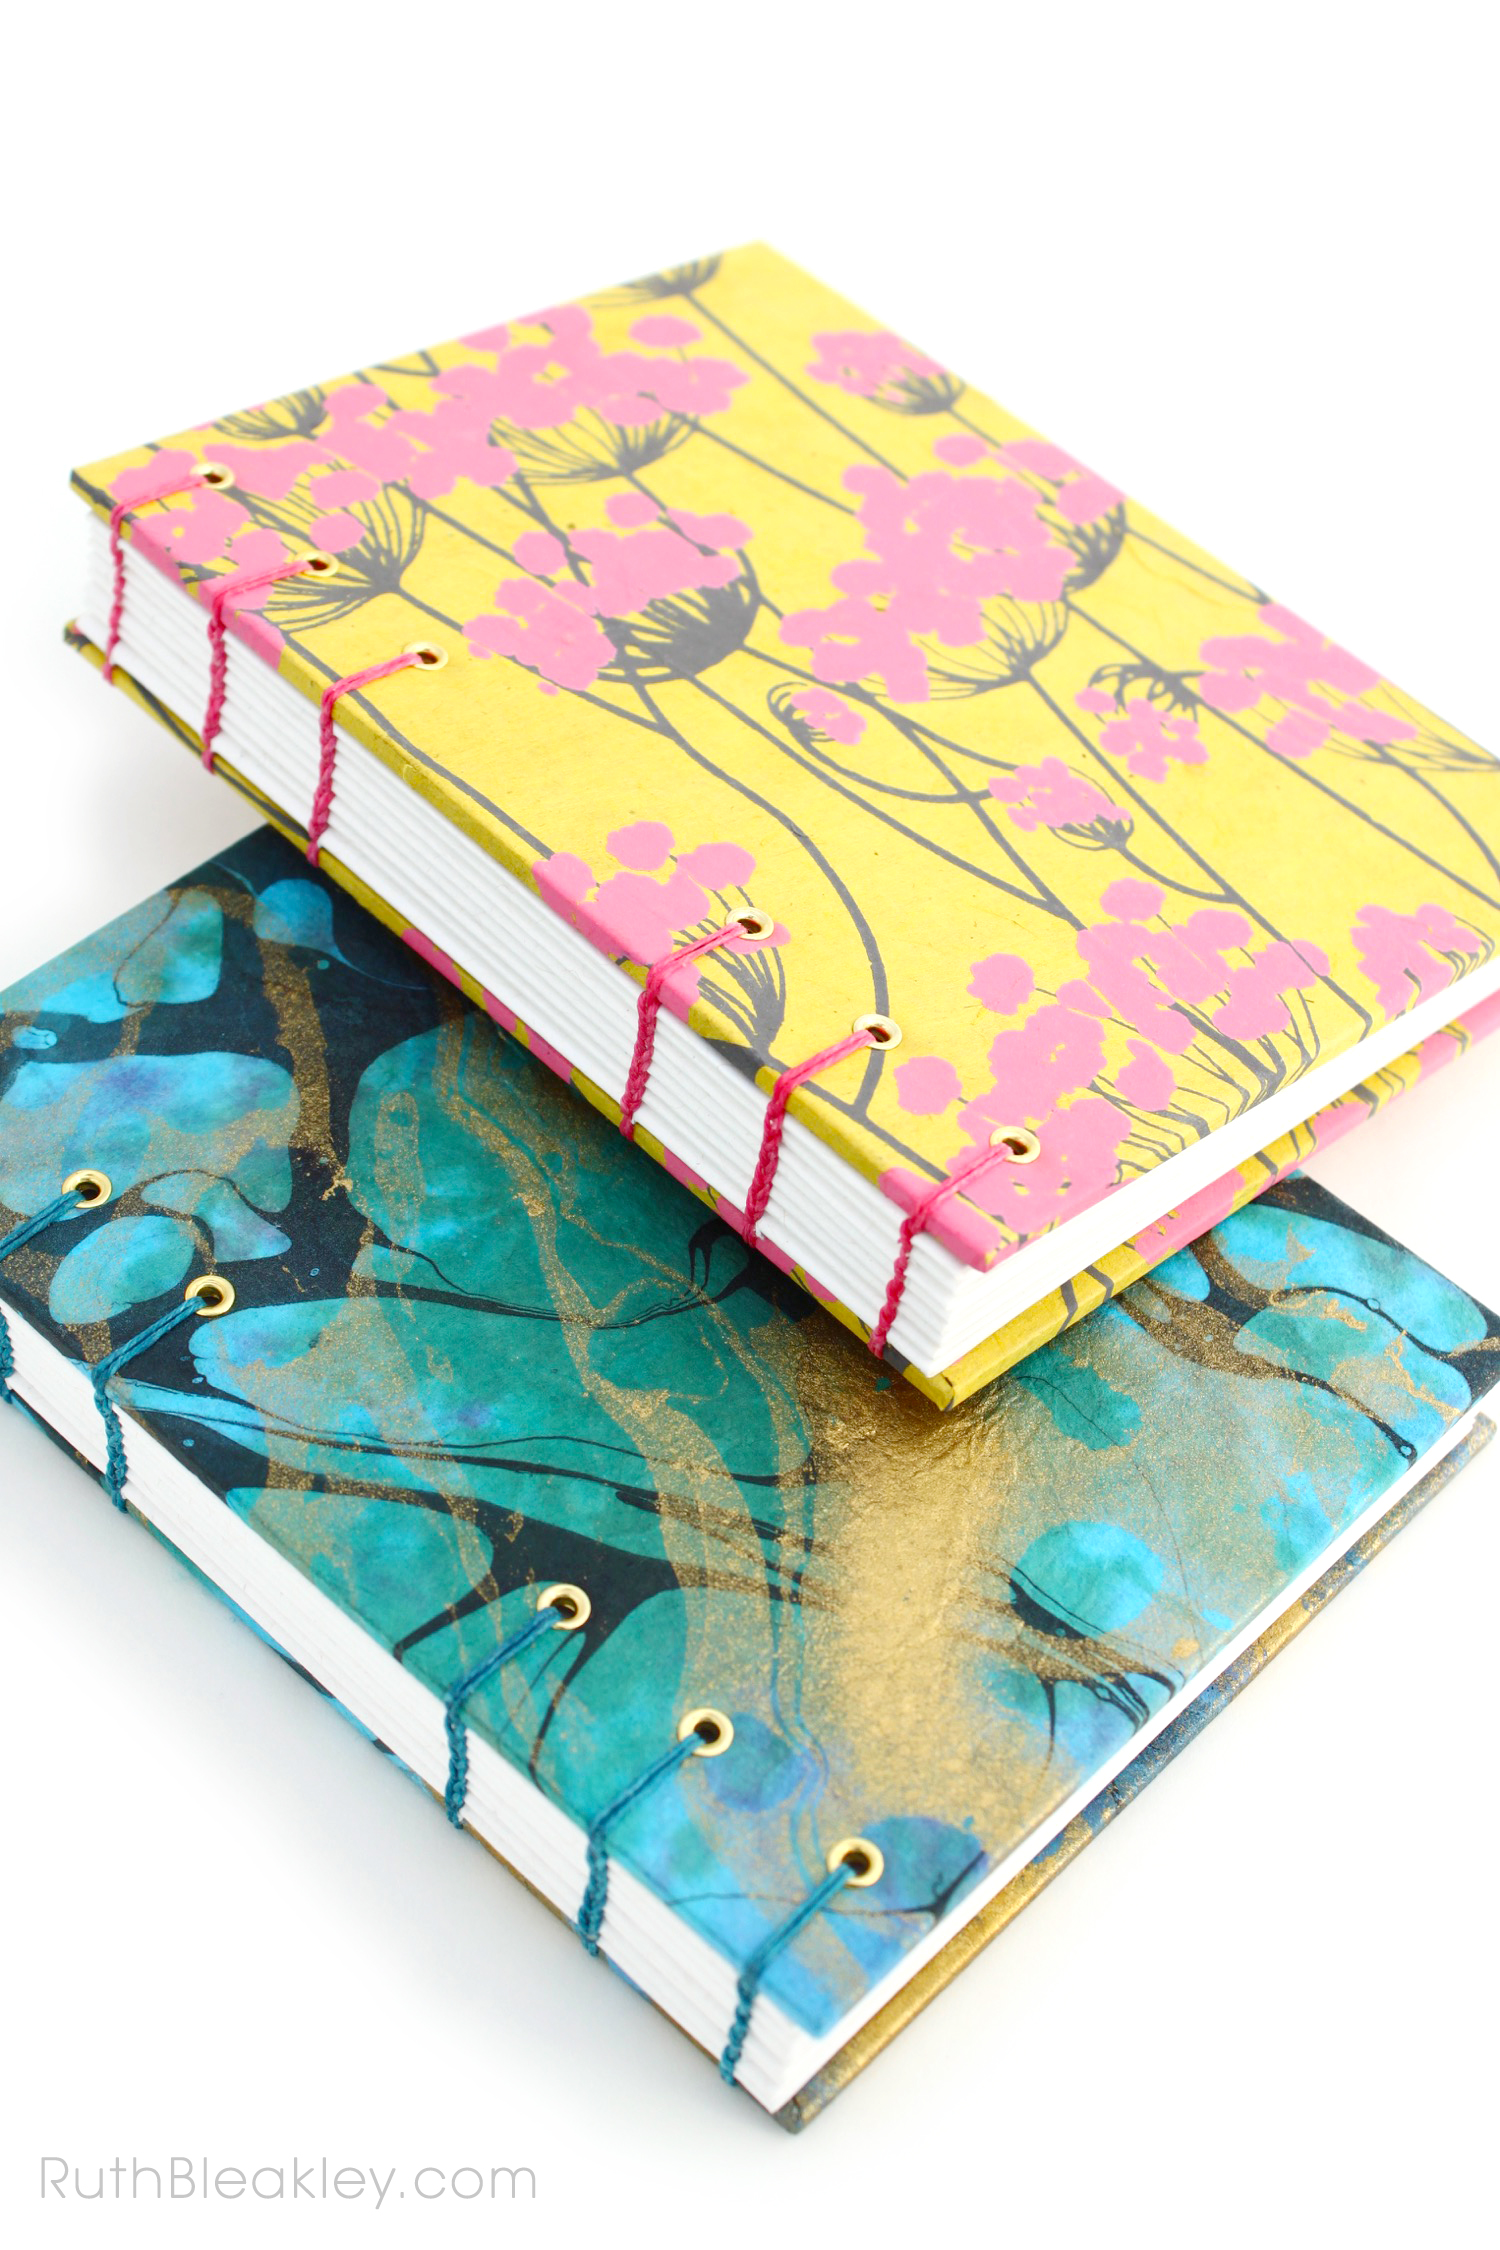 Unlined Blank Sketch Journal handmade by Ruth Bleakley from Indian floral paper - yellow and pink 